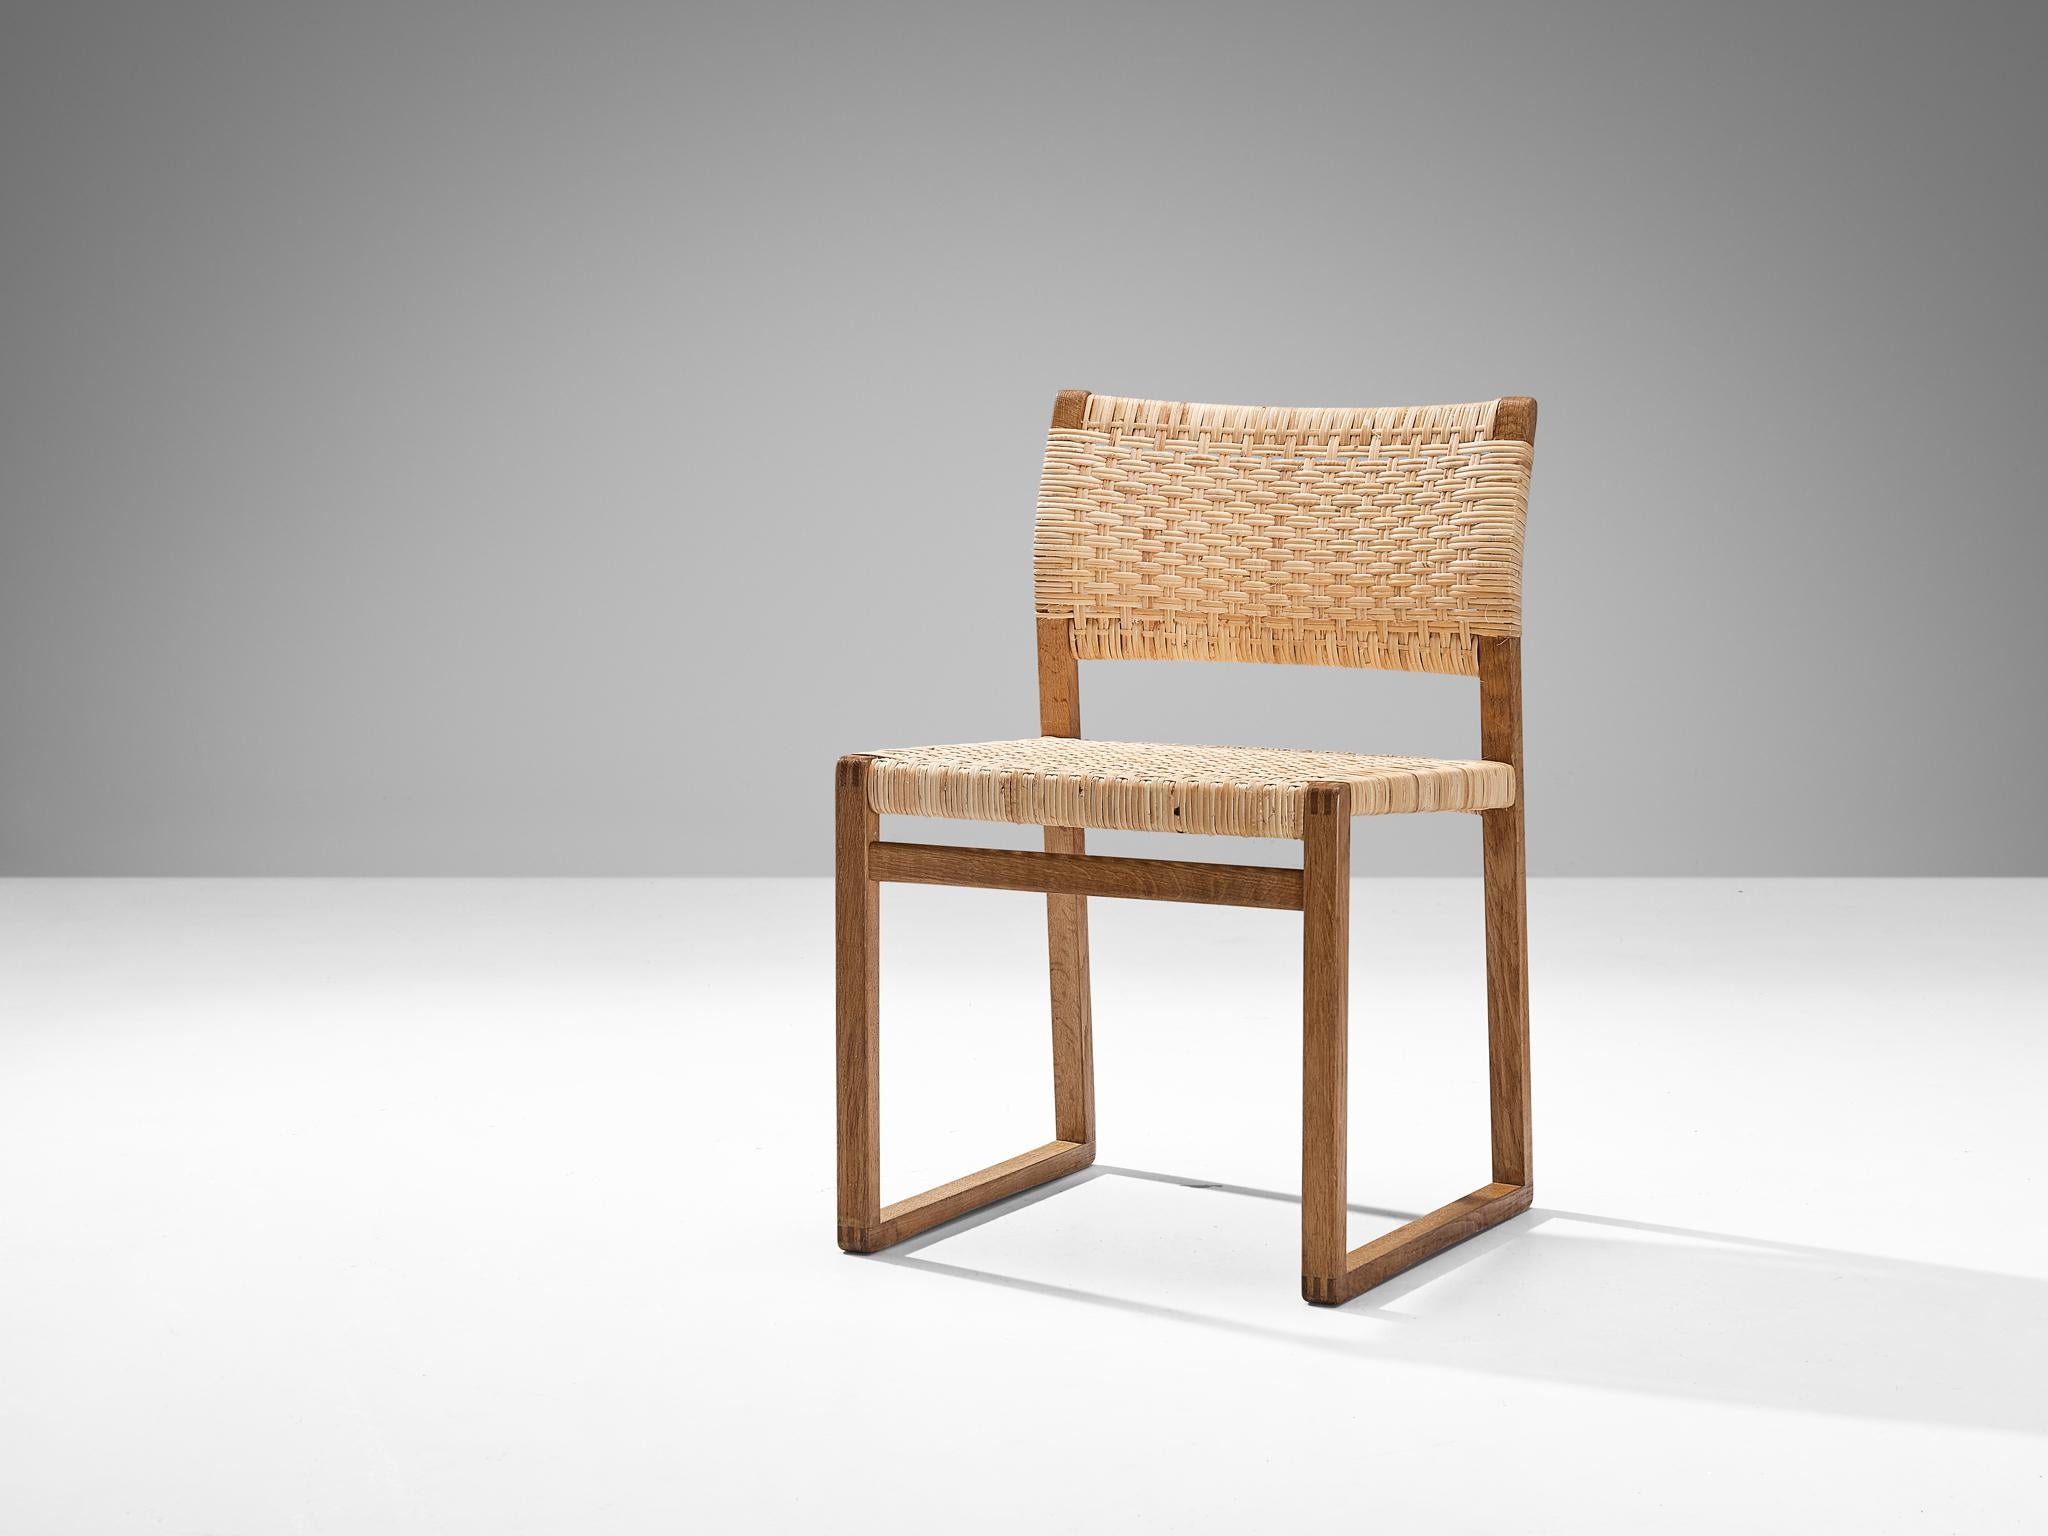 Børge Mogensen for Fredericia, dining chair, model ‘BM 61’, oak, cane wicker, Denmark, 1950s.

This naturalistic looking chair is characterized by a splendid design featuring simple shapes and authentic materials. The frame is composed of slender